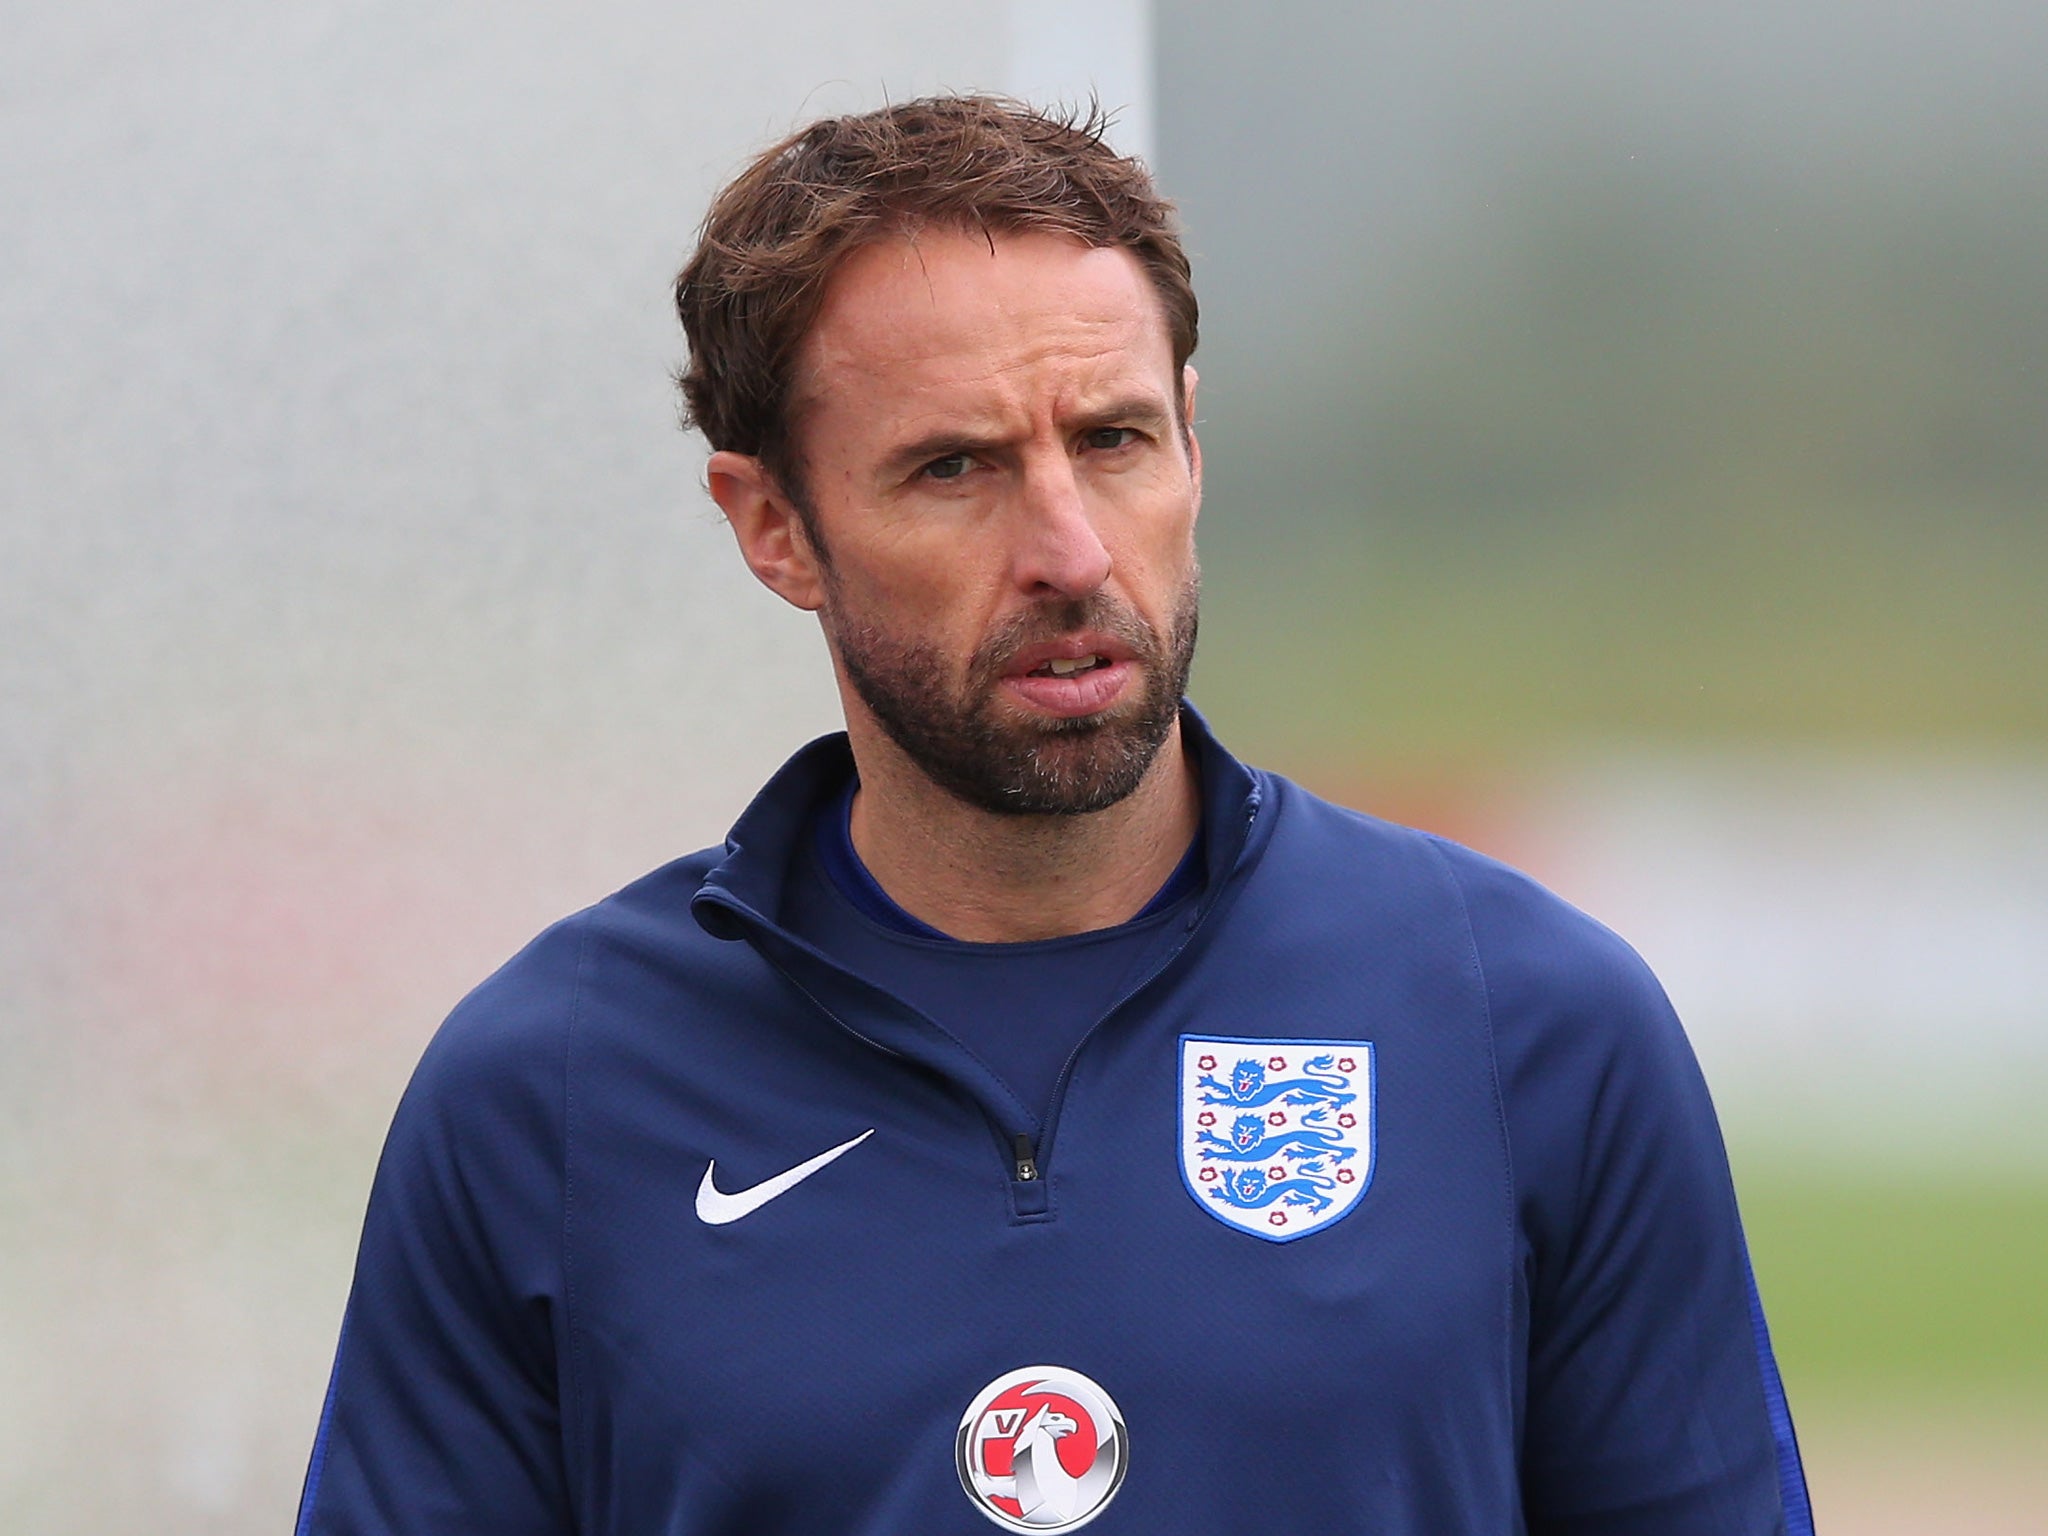 Southgate is ready to take on the mantle as England's caretaker